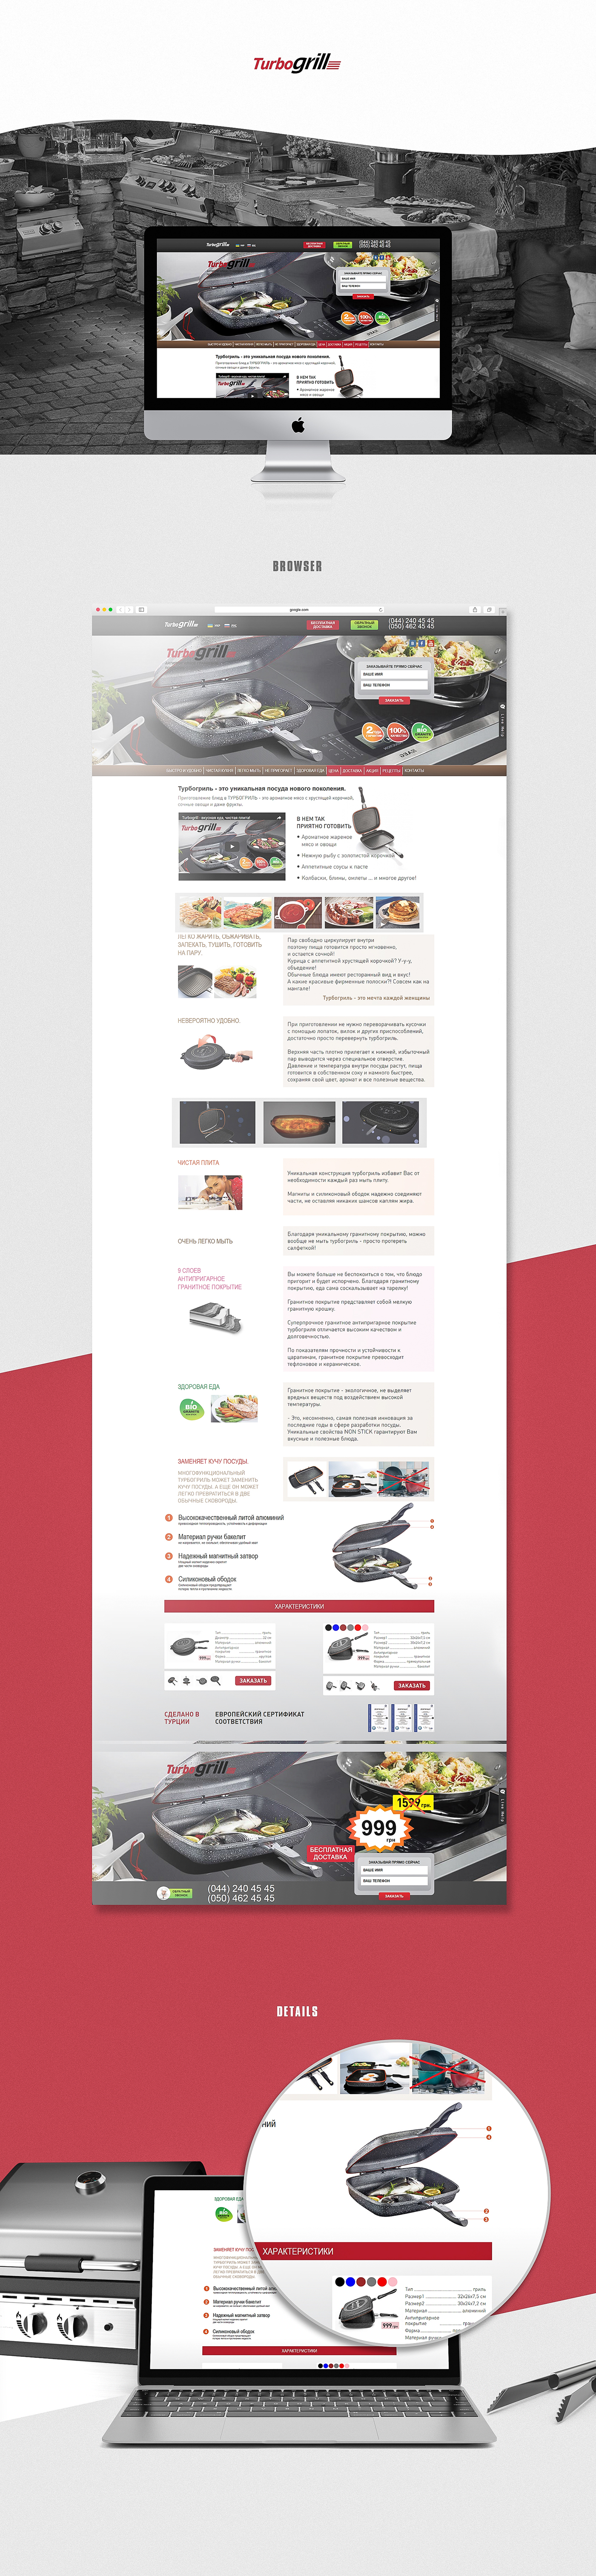 grill turbogrill landing page UI ux design